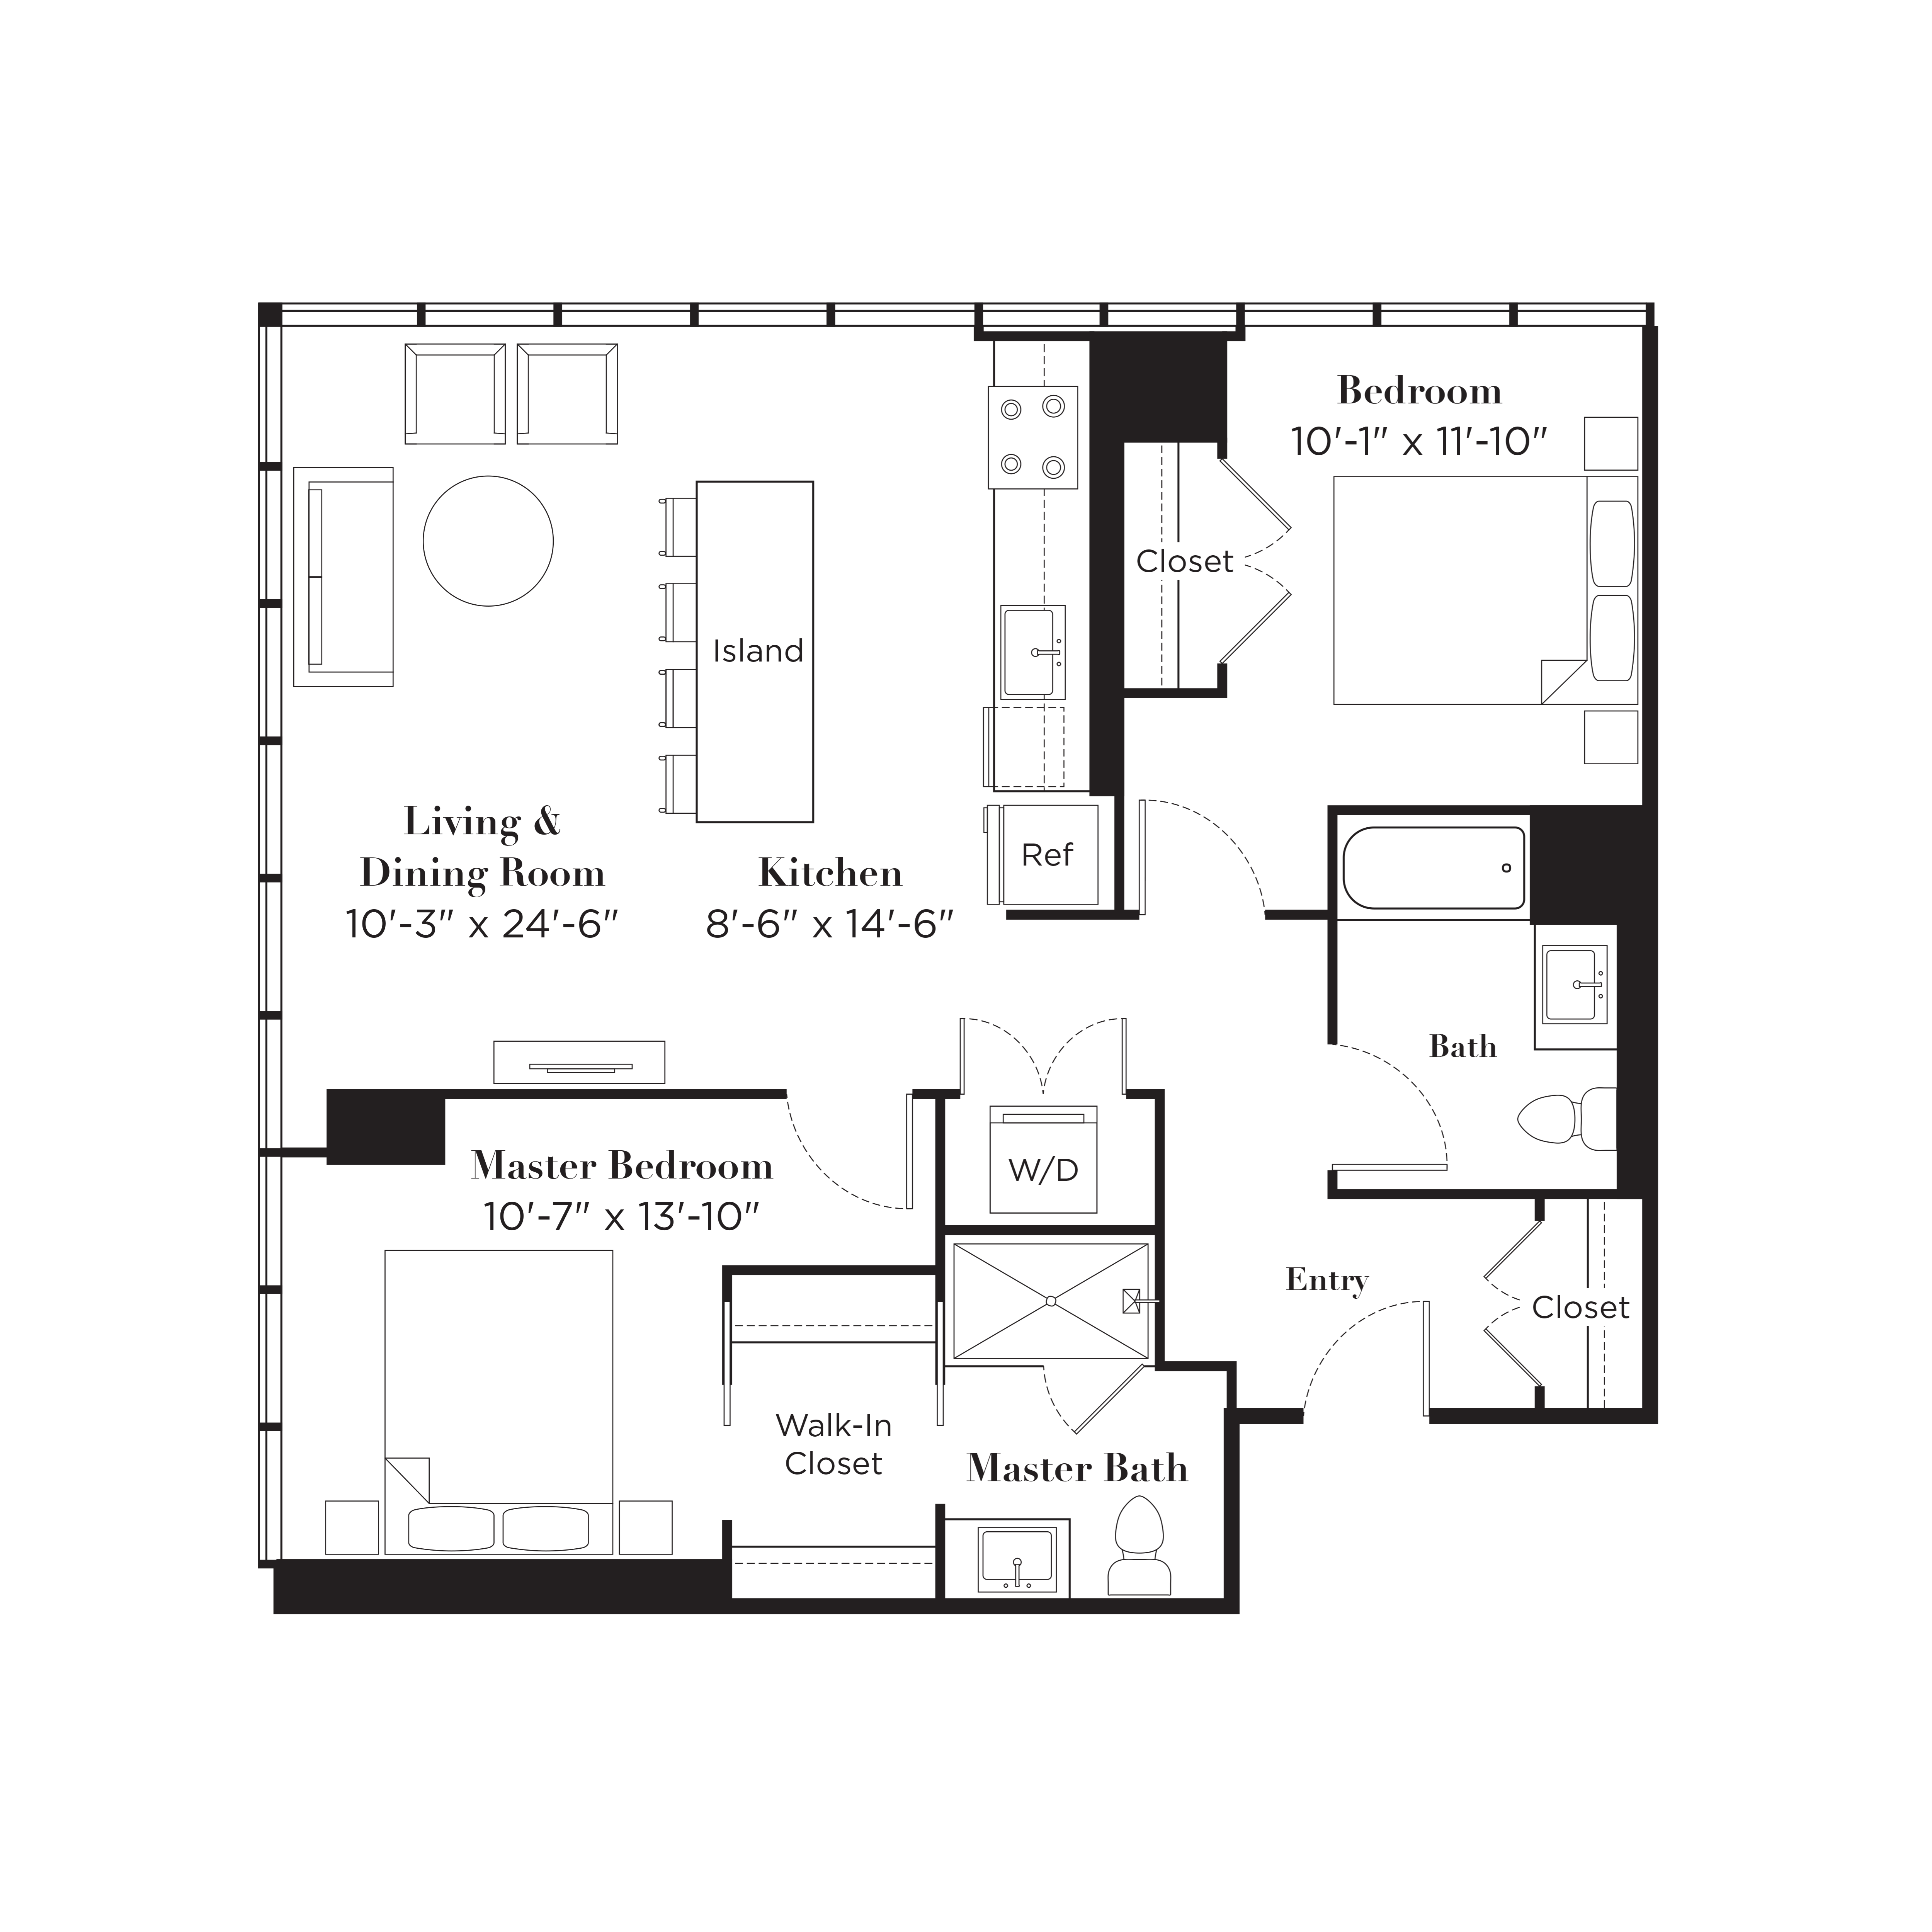 Floor Plans of milieu in Chicago, IL